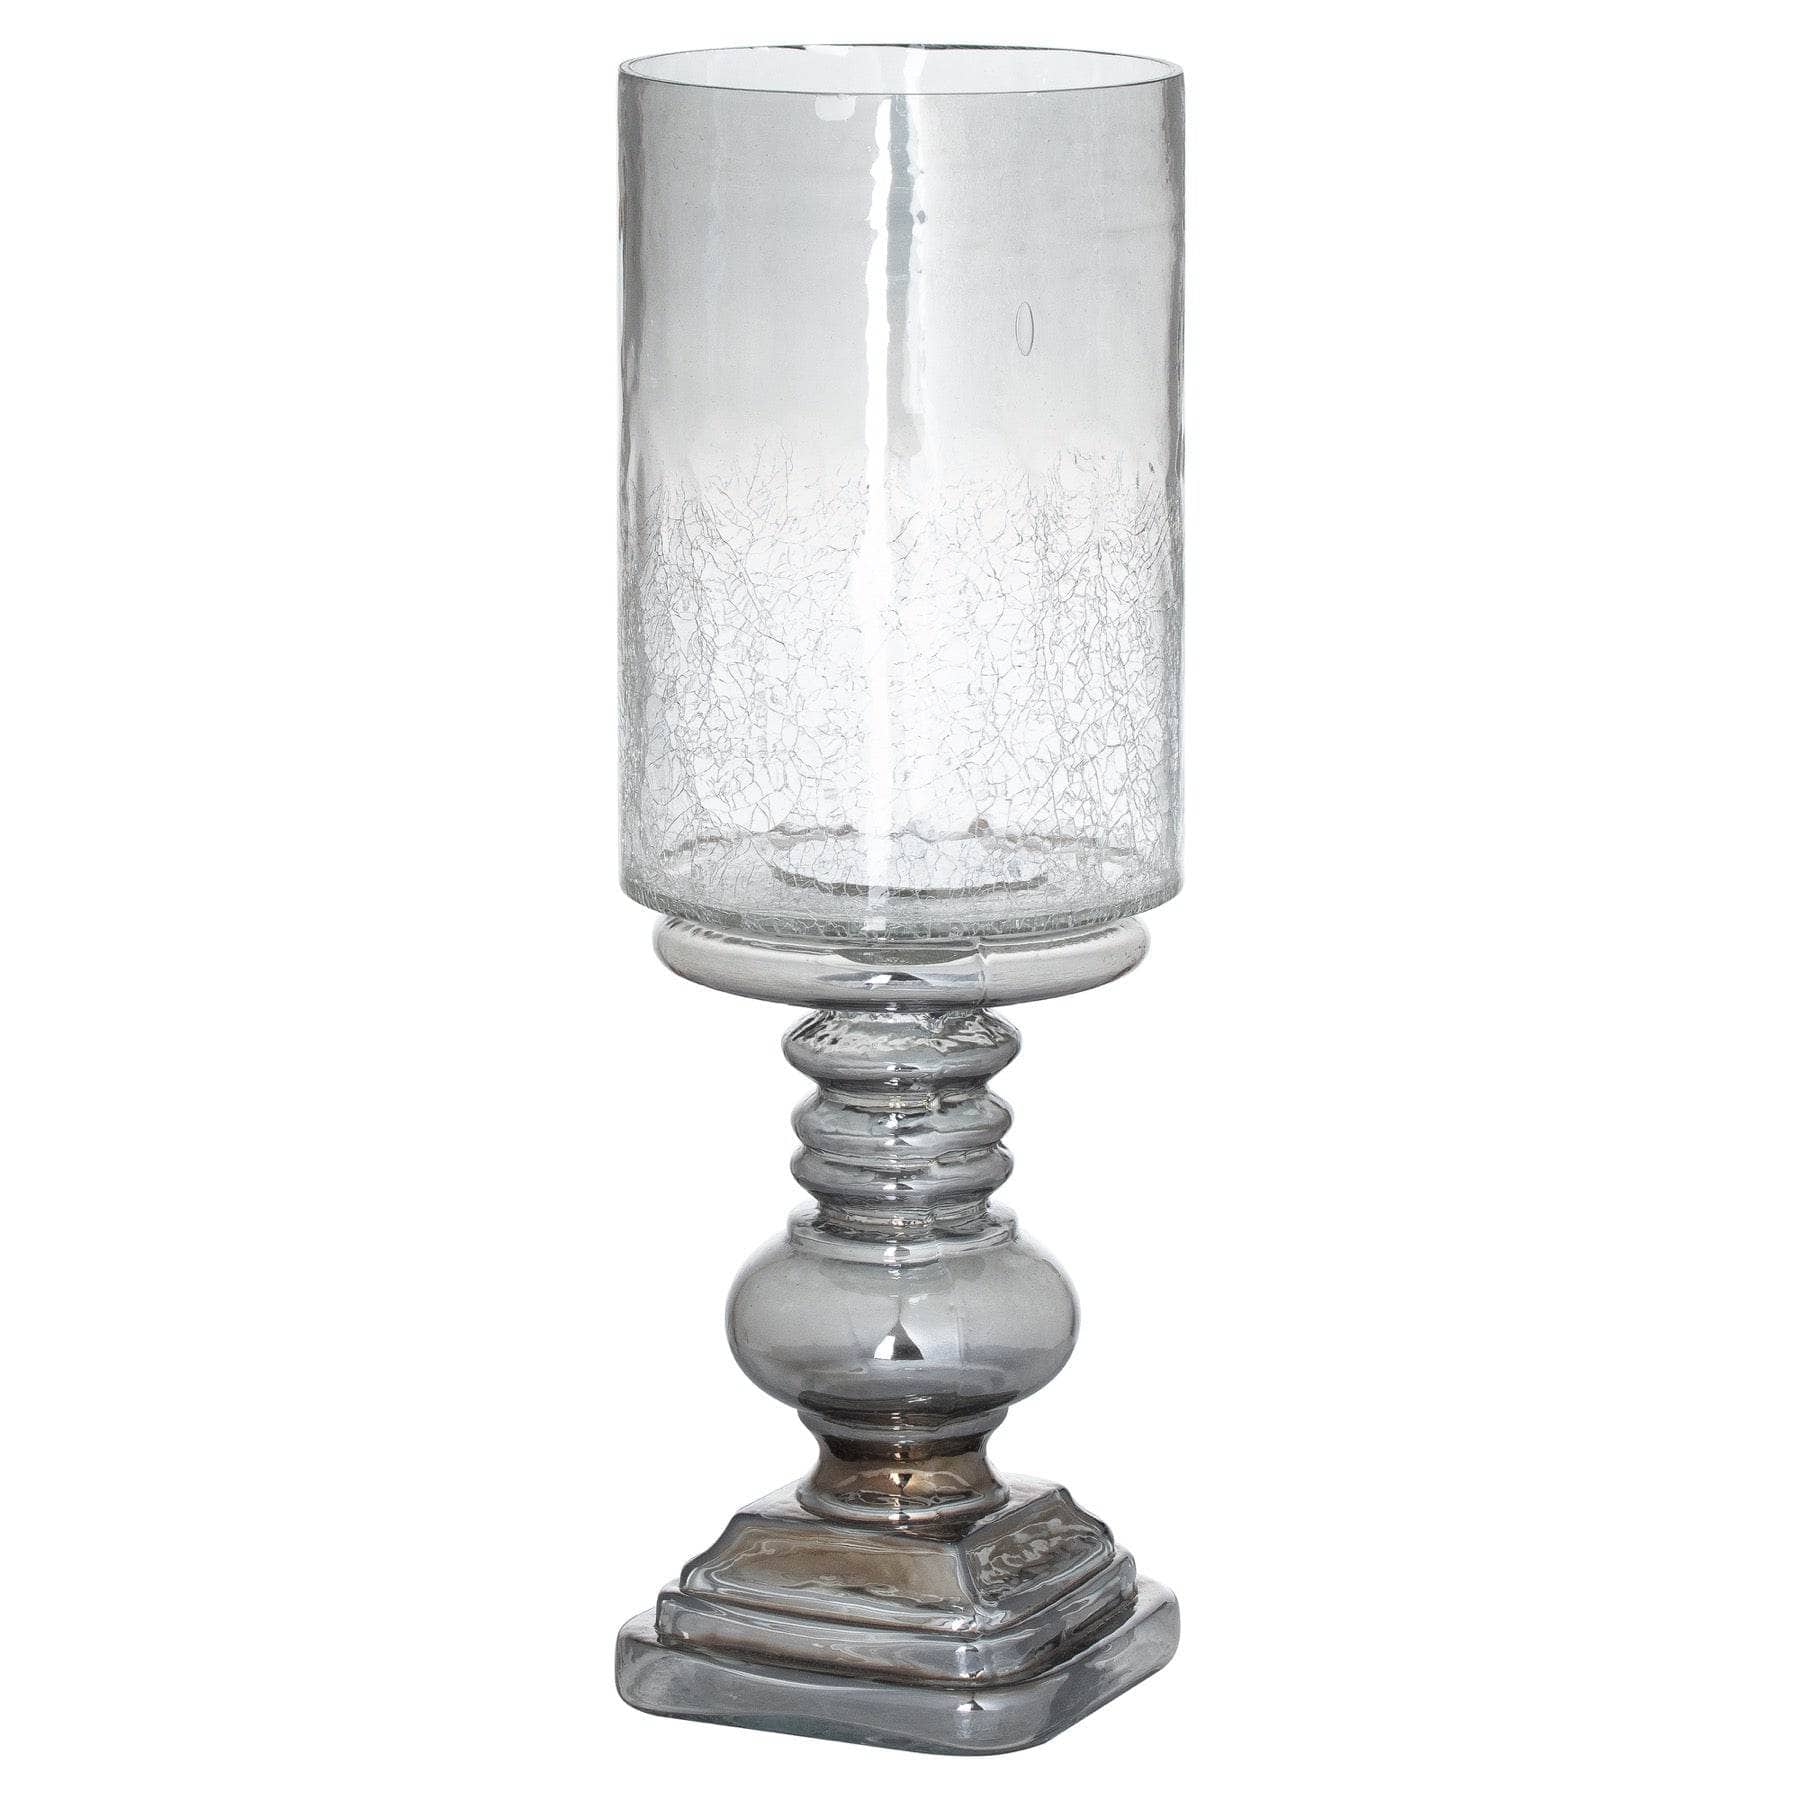 Homeware  -  Smoked Glass Candle Holder  -  60001138